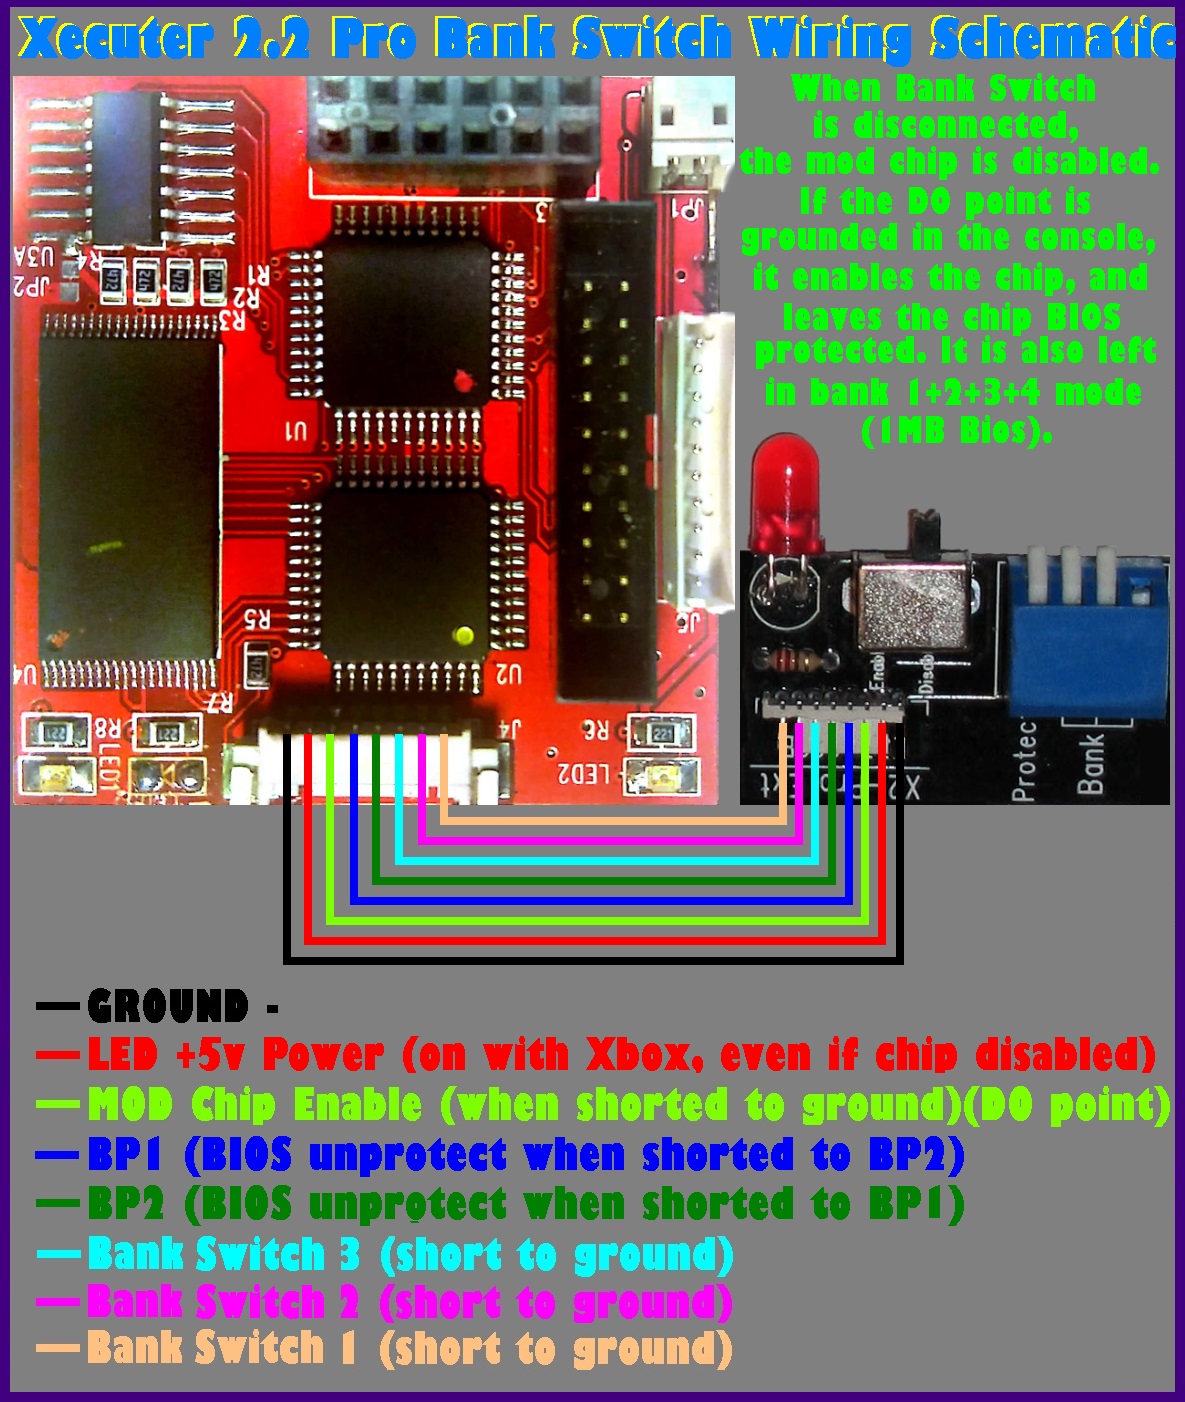 Ps2 Mod Chip Wiring Diagram